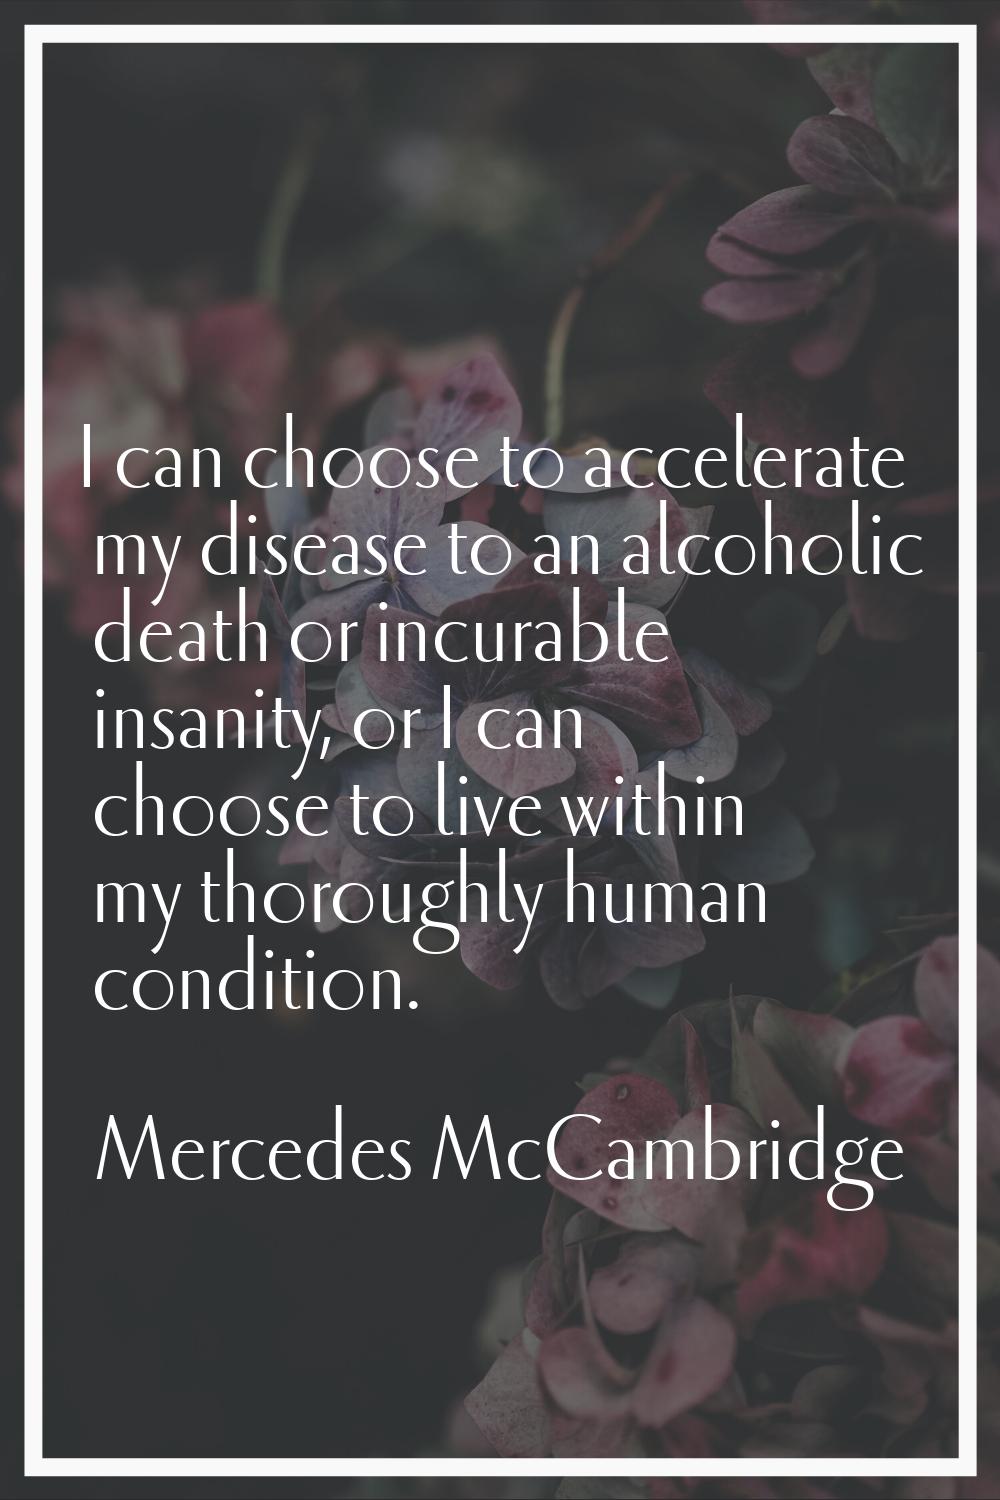 I can choose to accelerate my disease to an alcoholic death or incurable insanity, or I can choose 